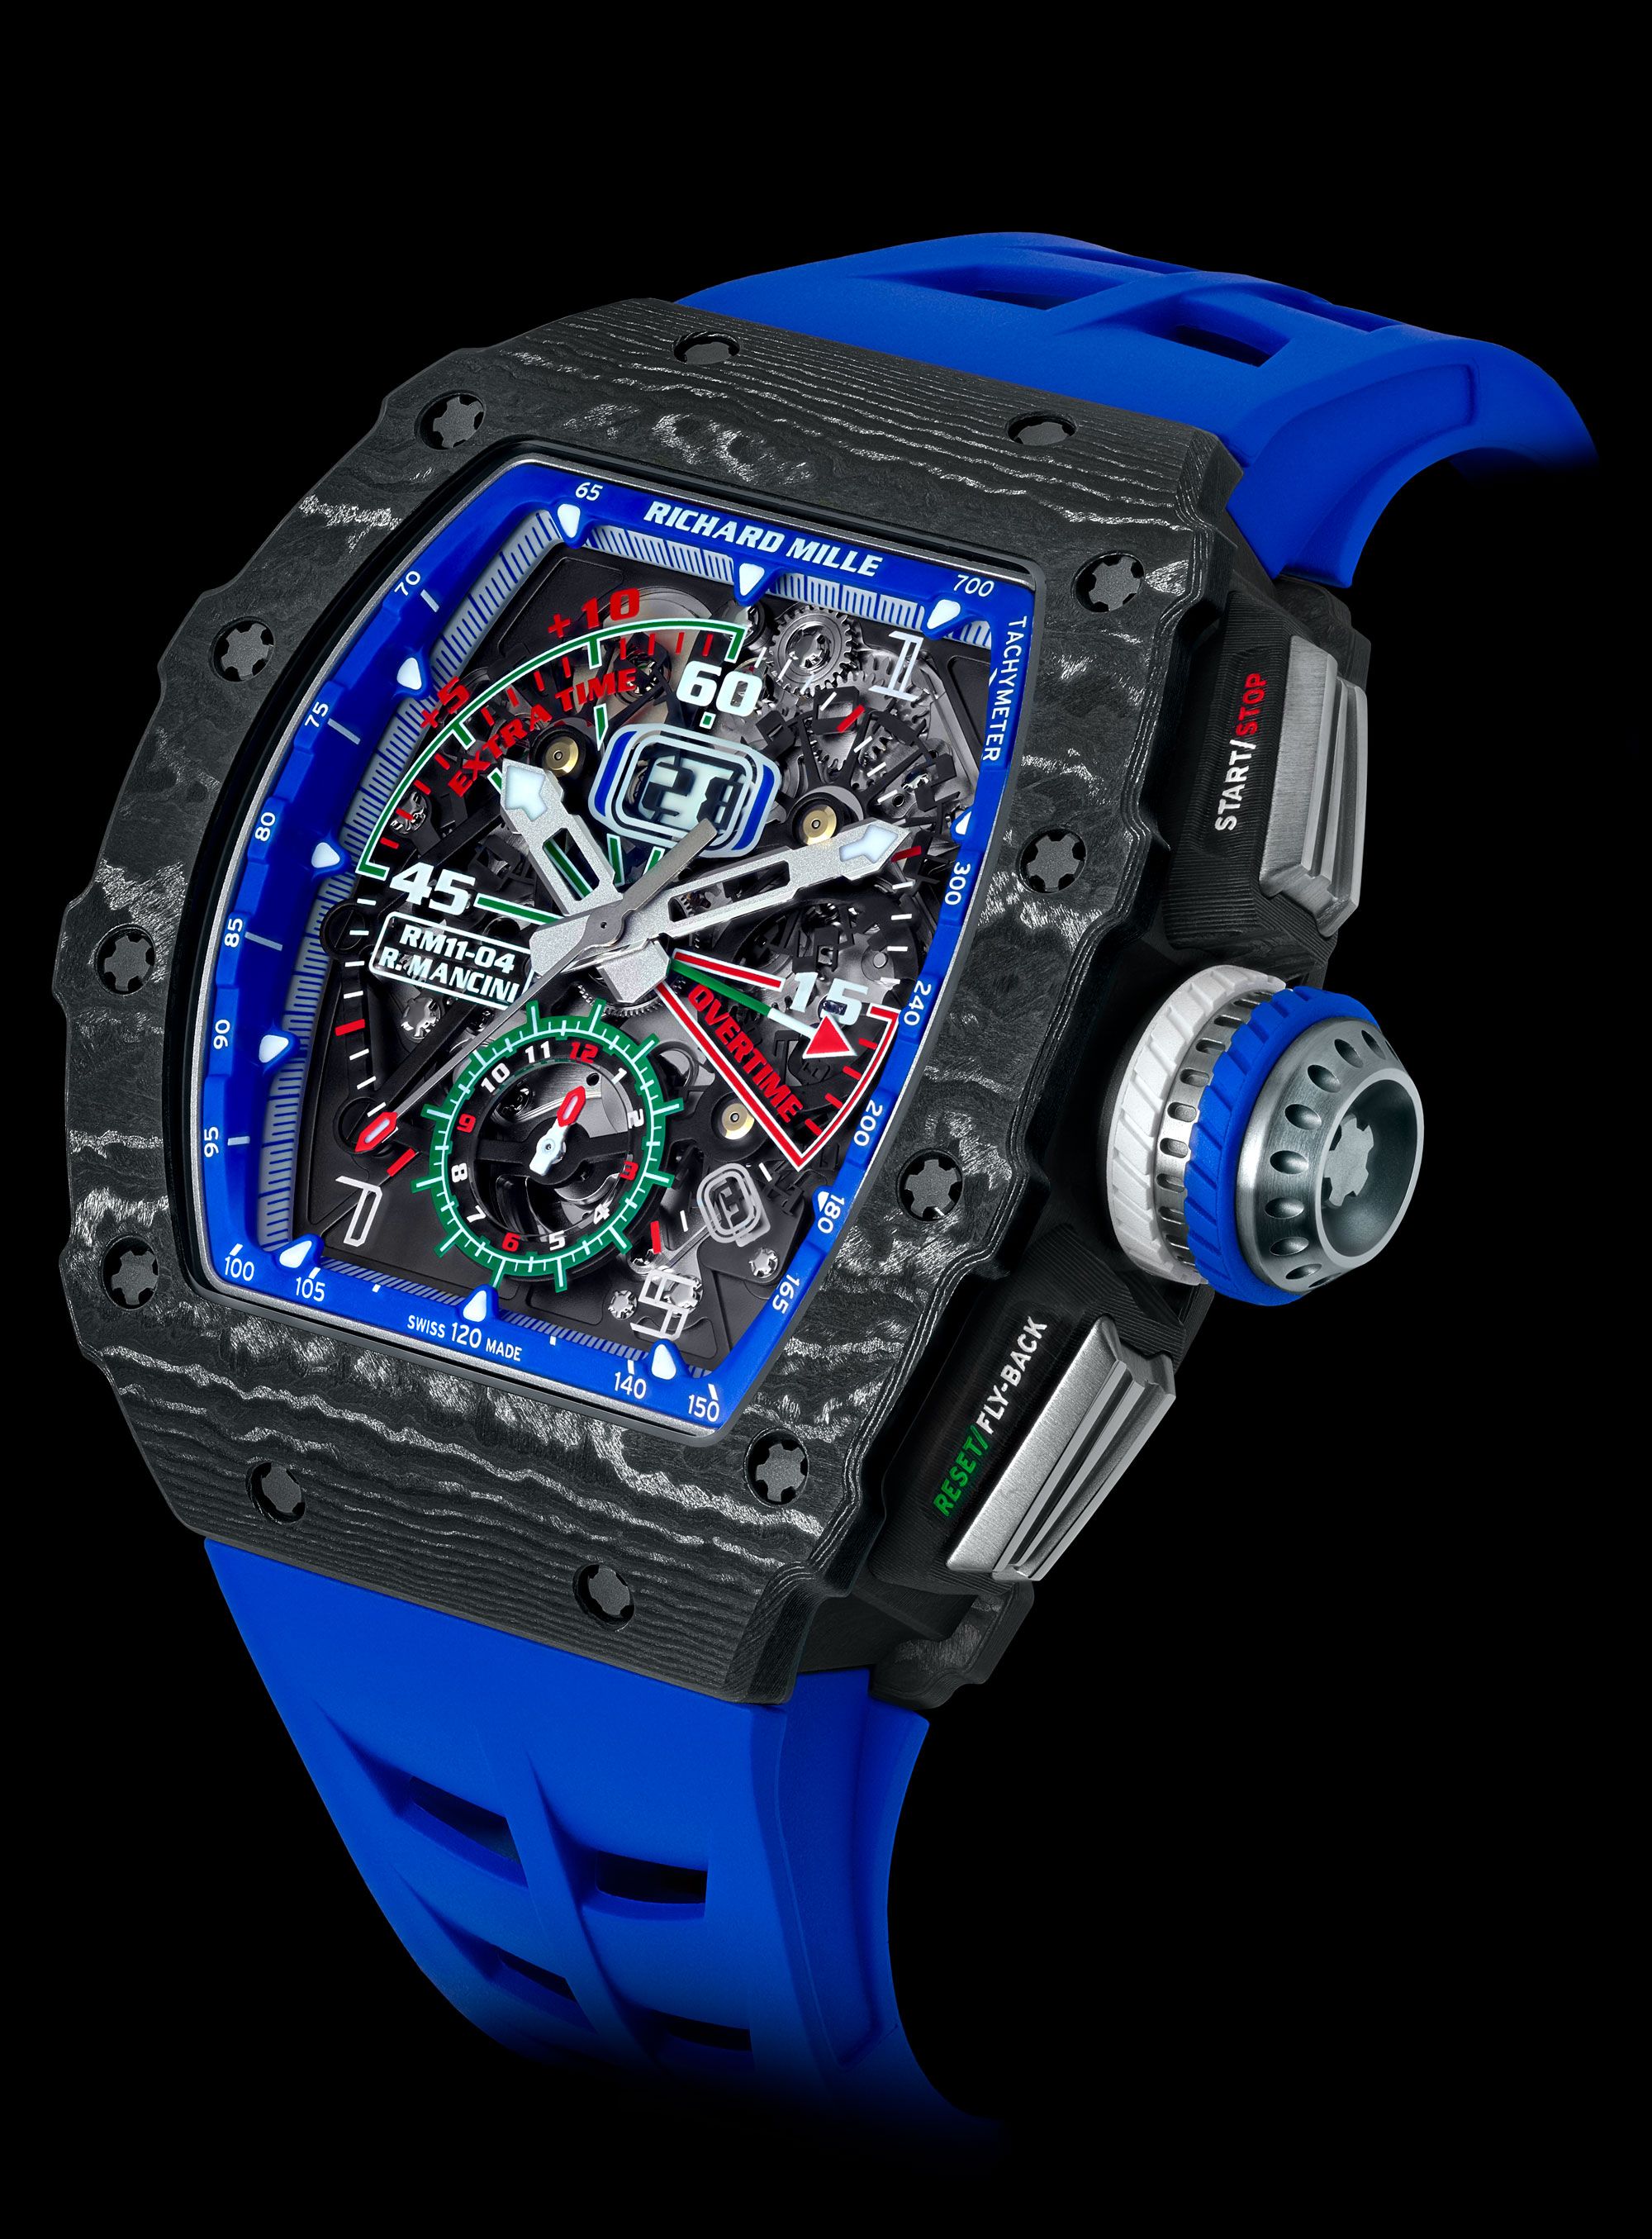 Richard Mille RM 011 Black Ceramic Yellow Flash Limited to 50pc Worldwide